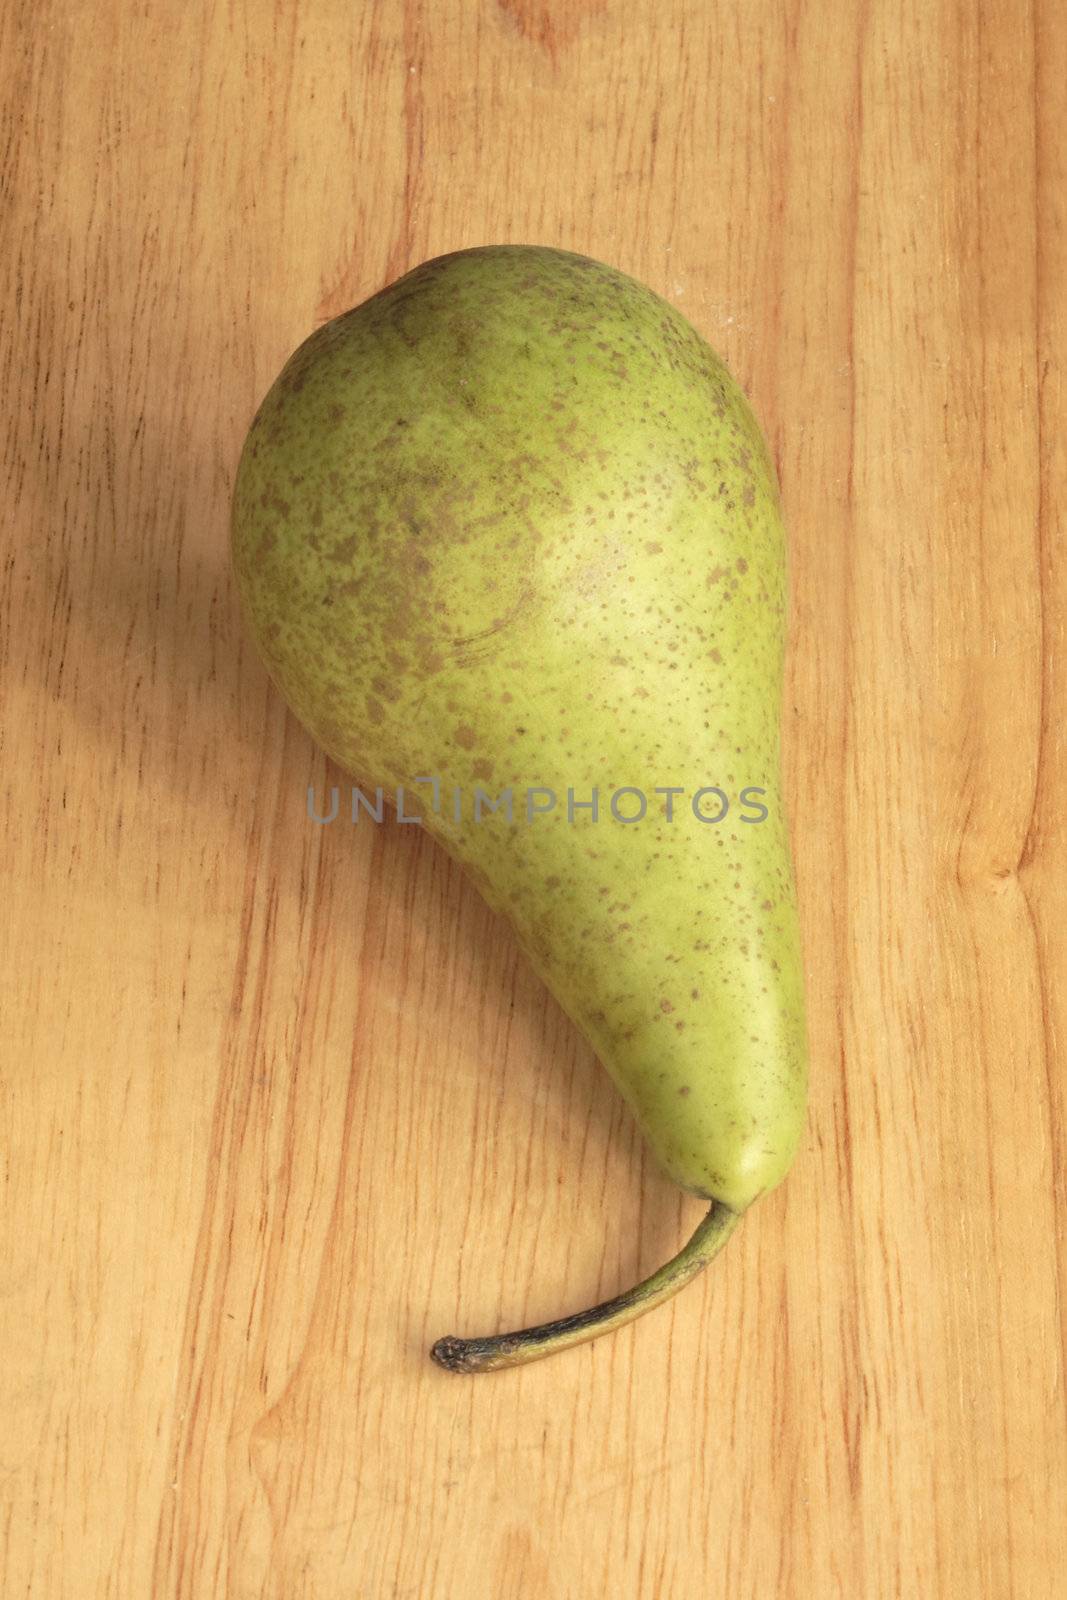 conference pear on a wooden board